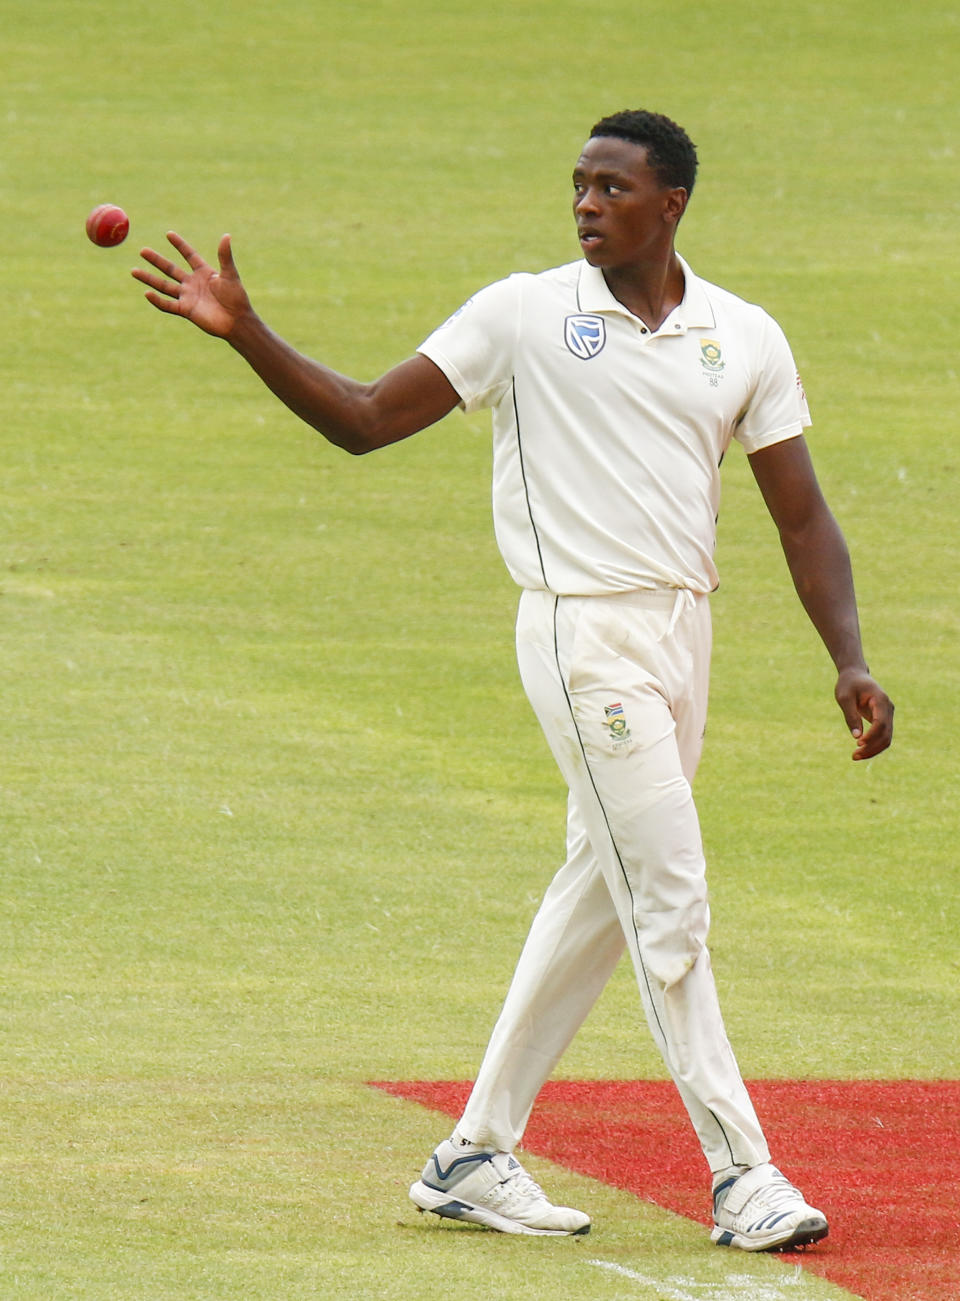 South Africa's Kagiso Rabada, takes the ball to bowl during their third day of the second cricket test at St. George's Park in Port Elizabeth, South Africa between South Africa and Sri Lanka Saturday, Feb. 23, 2019. (AP Photo/Michael Sheehan)